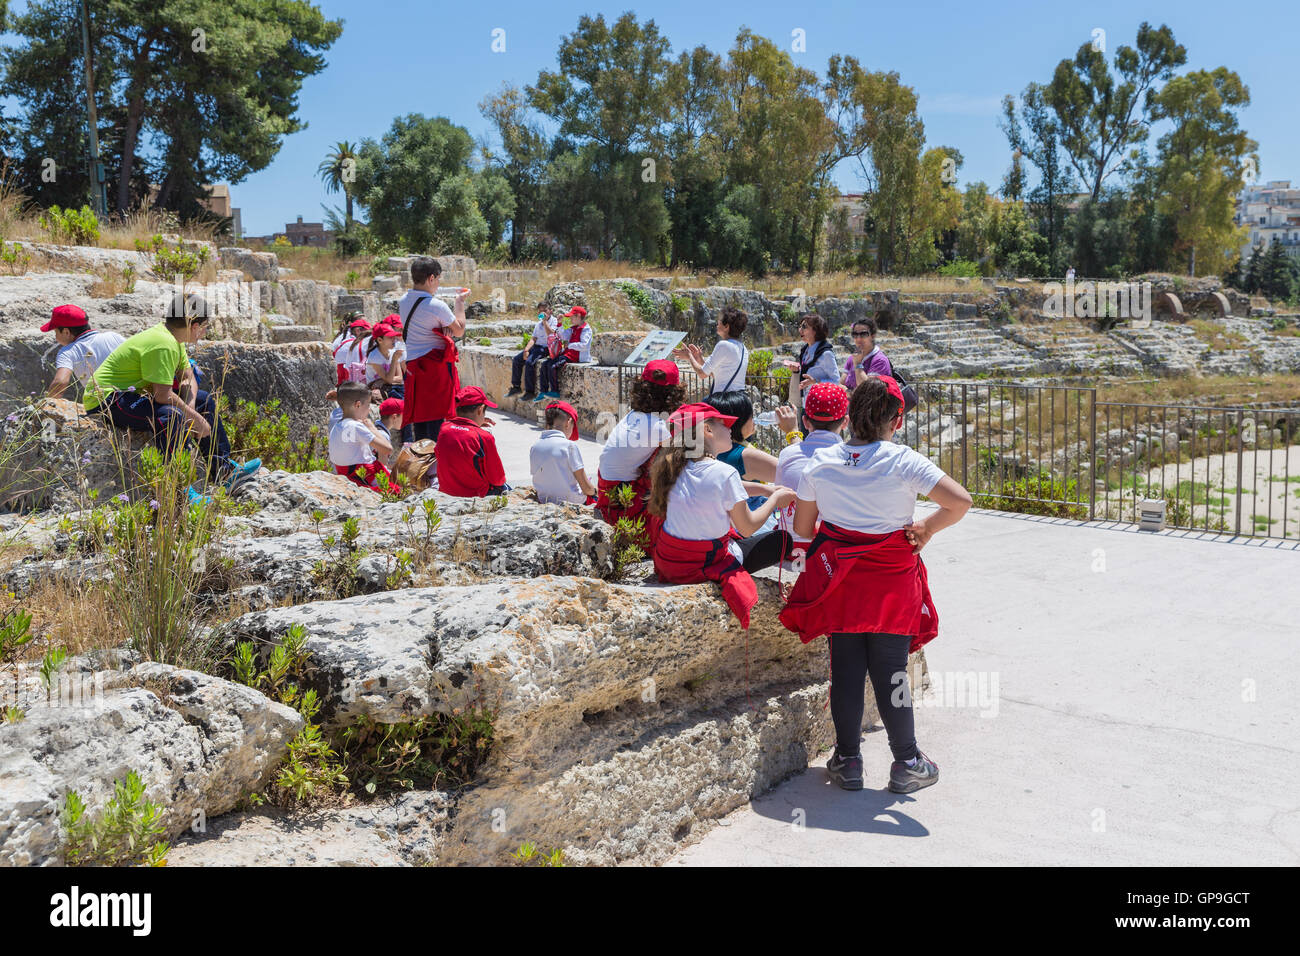 SIRACUSA ITALY - MAY 18: School pupils visiting the Greek theatre of Syracusa on May 18, 2016  at the island Sicily, Italy Stock Photo